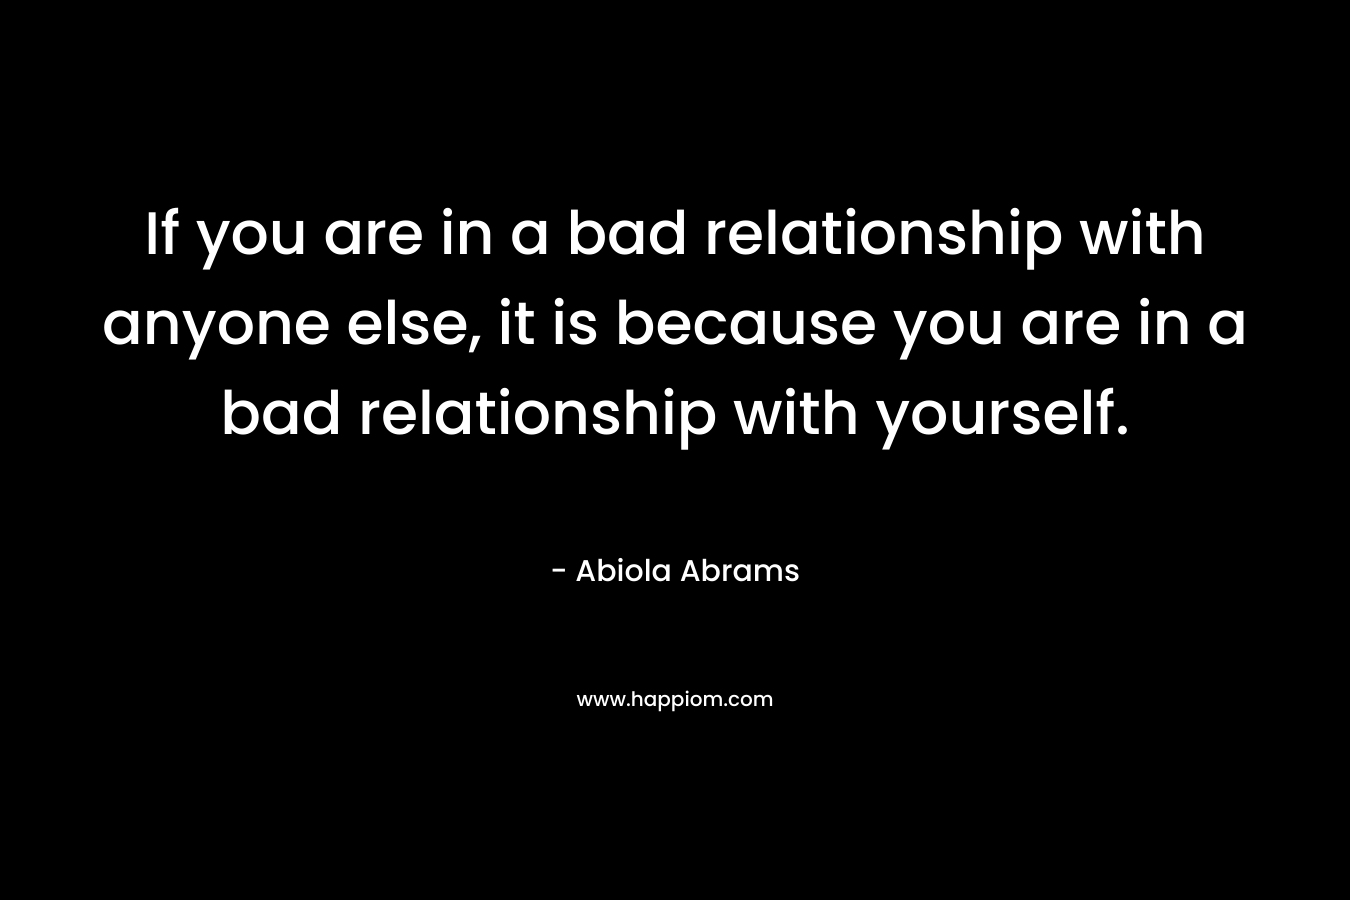 If you are in a bad relationship with anyone else, it is because you are in a bad relationship with yourself. – Abiola Abrams